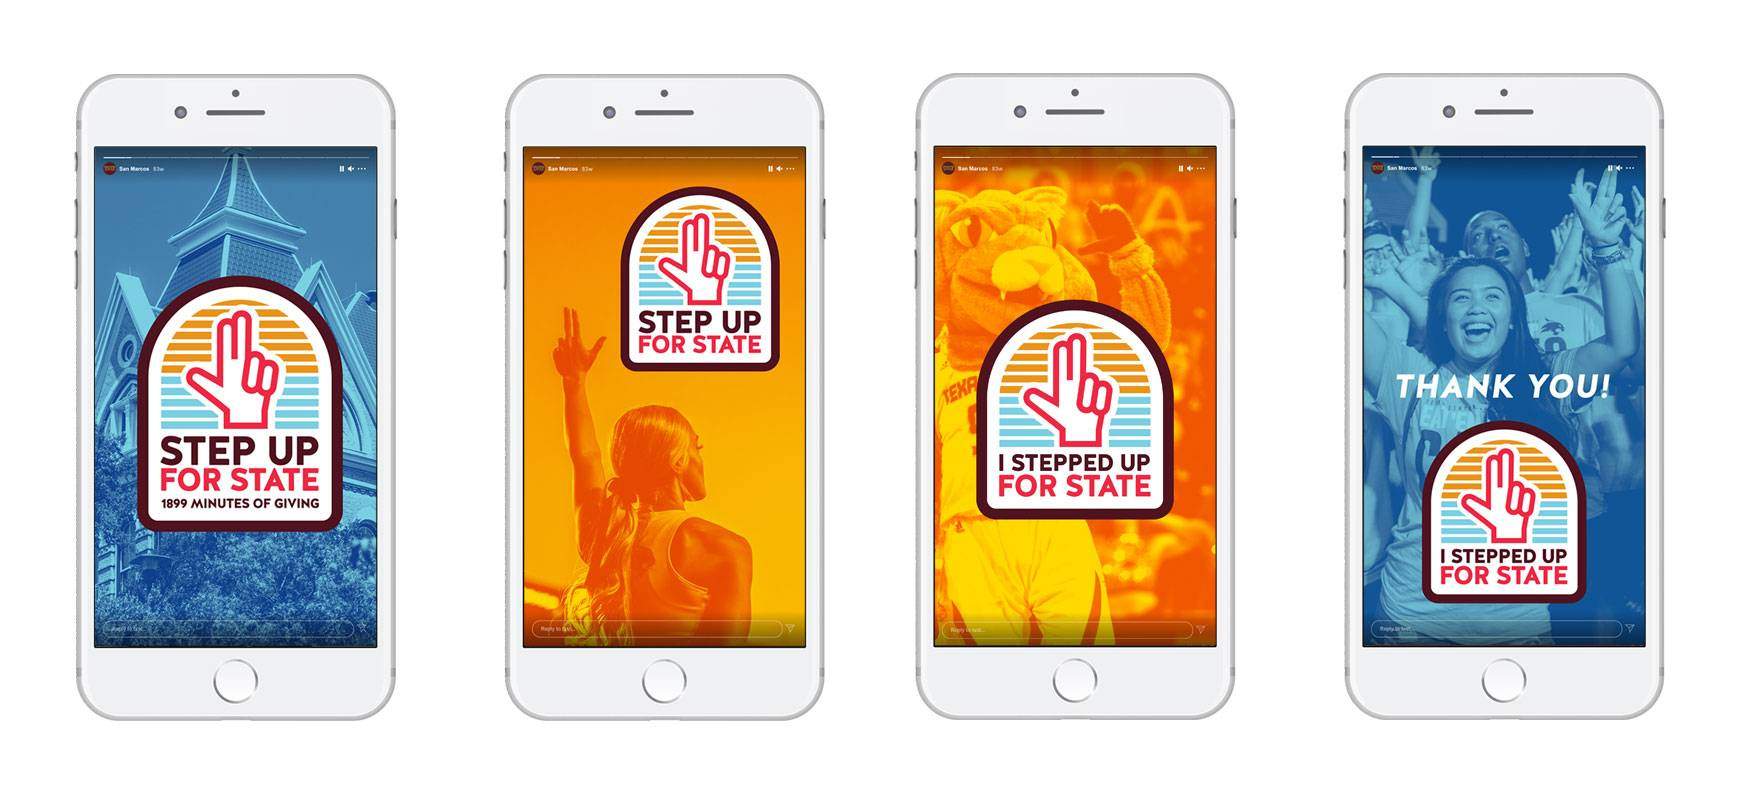 Step up for State instagram phone samples